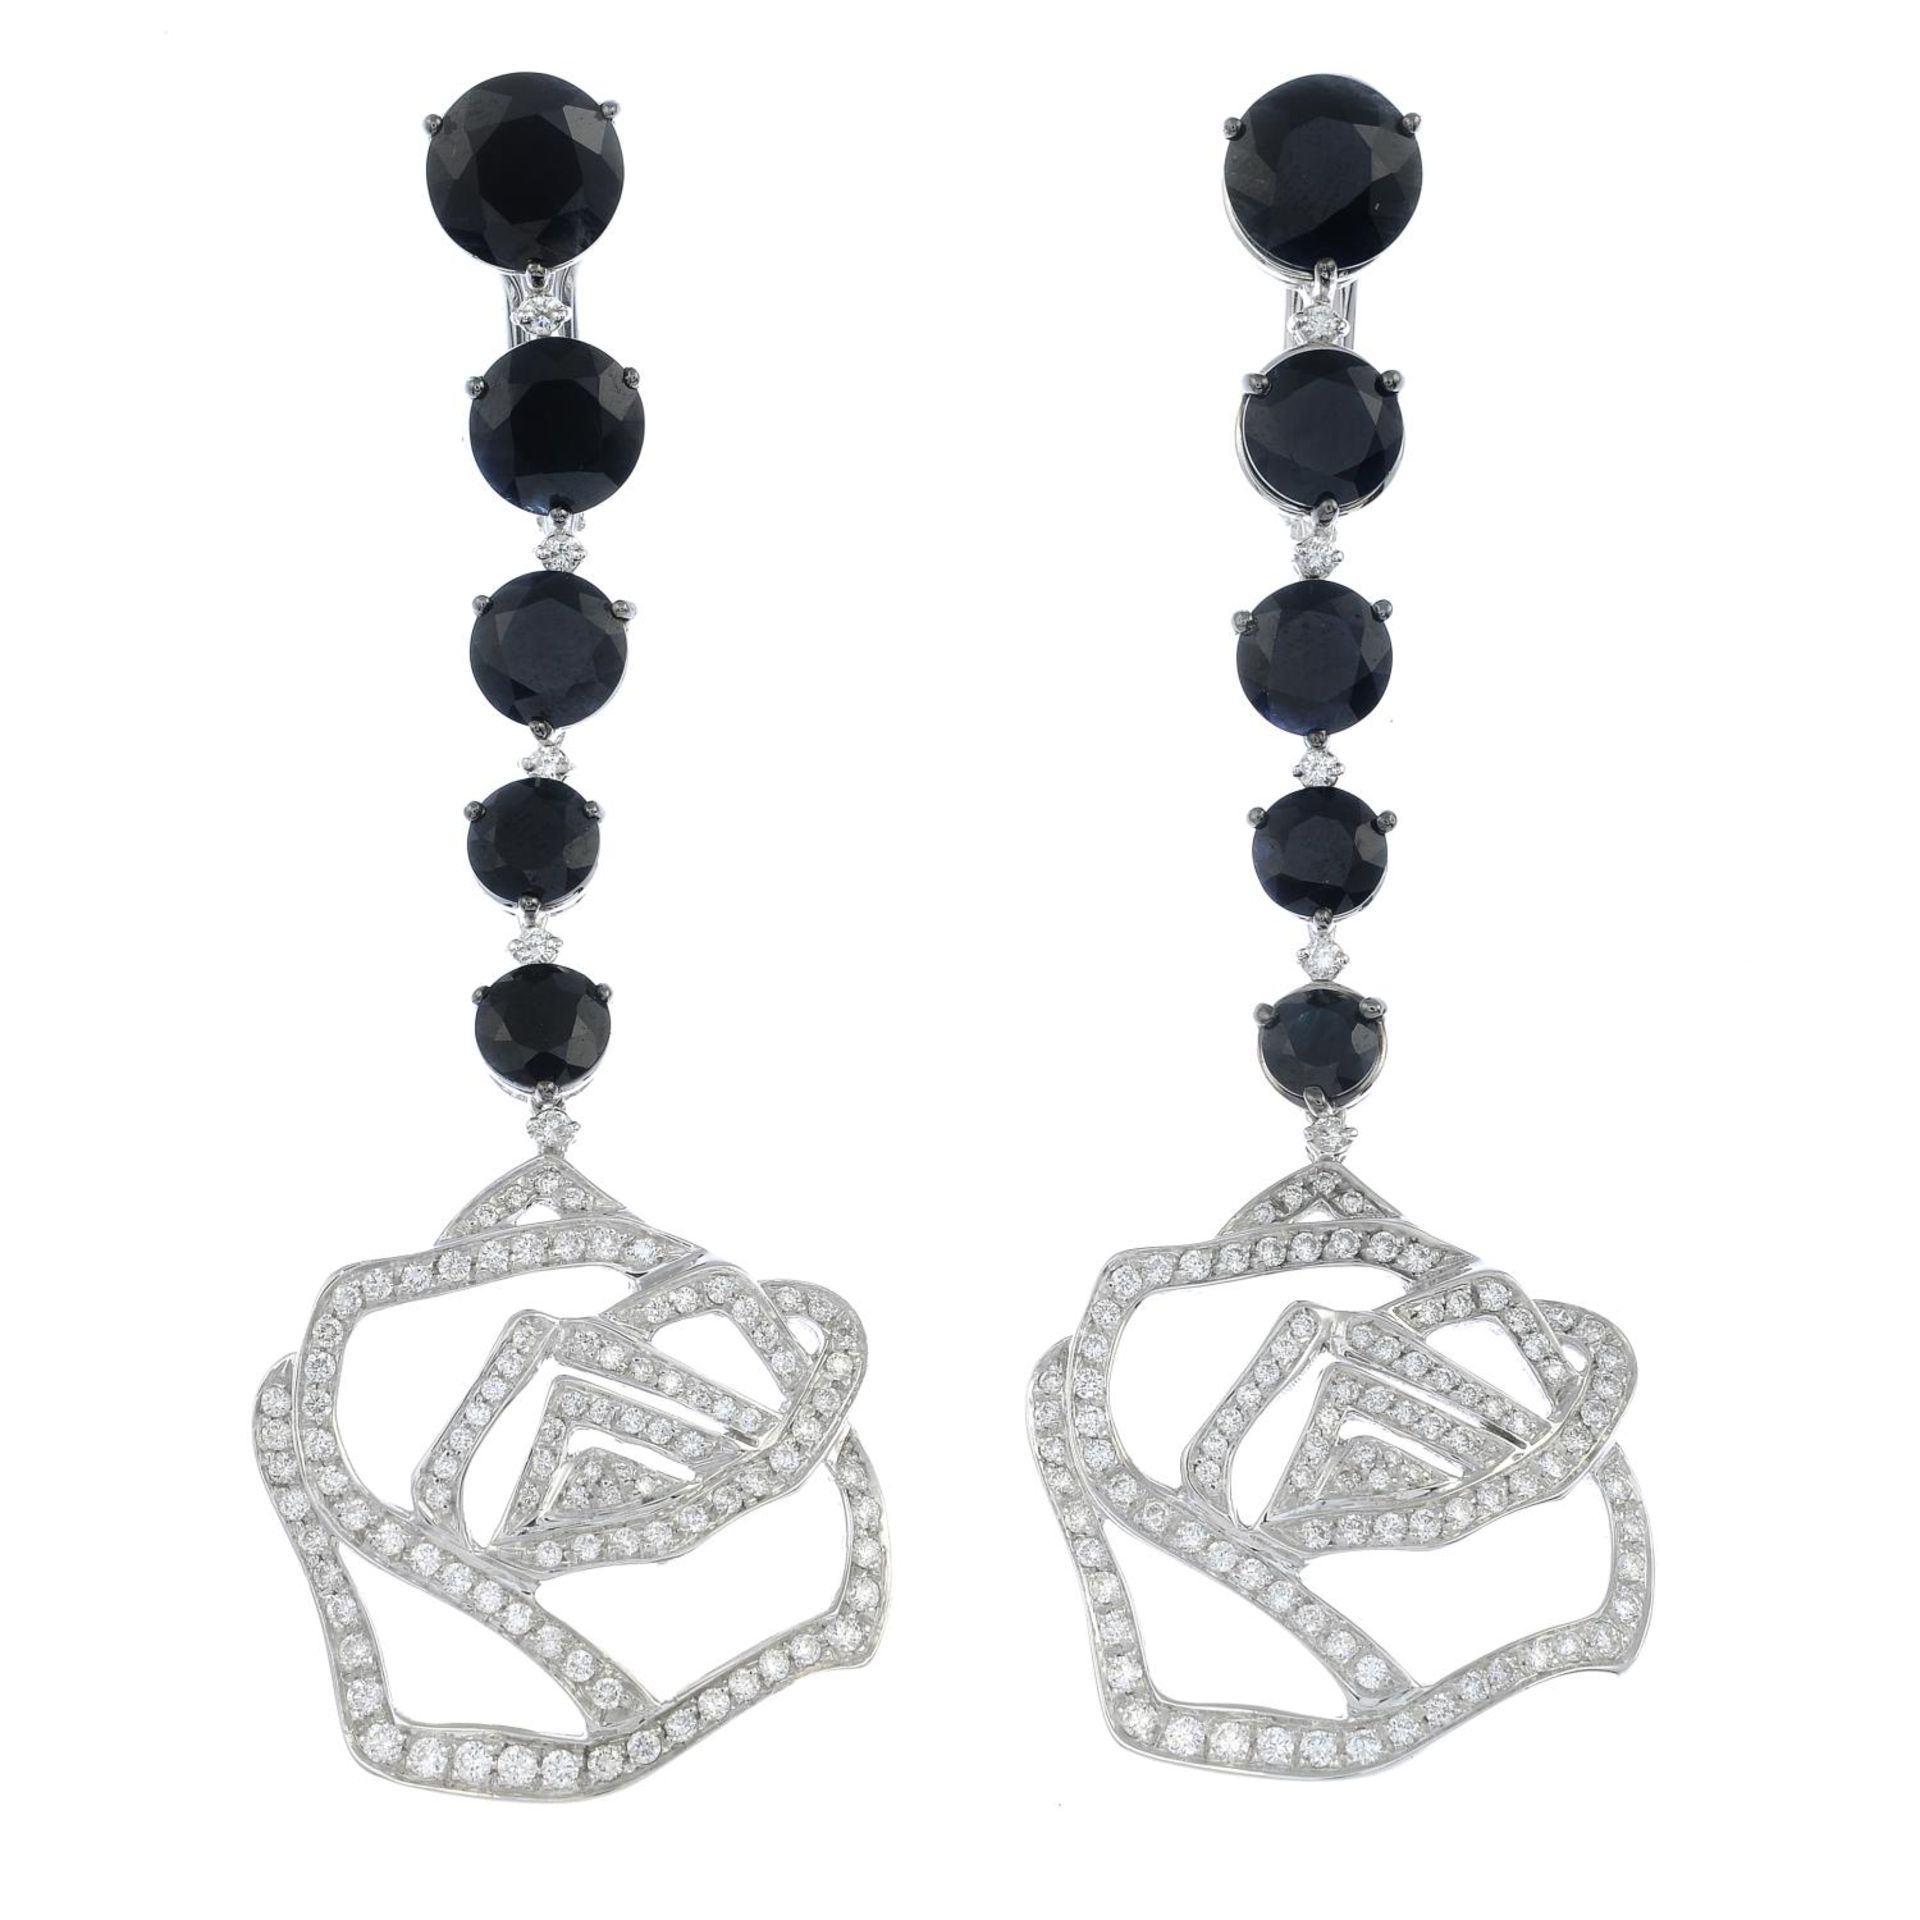 A pair of diamond and black gem rose earrings, by Gavello. - Image 3 of 3